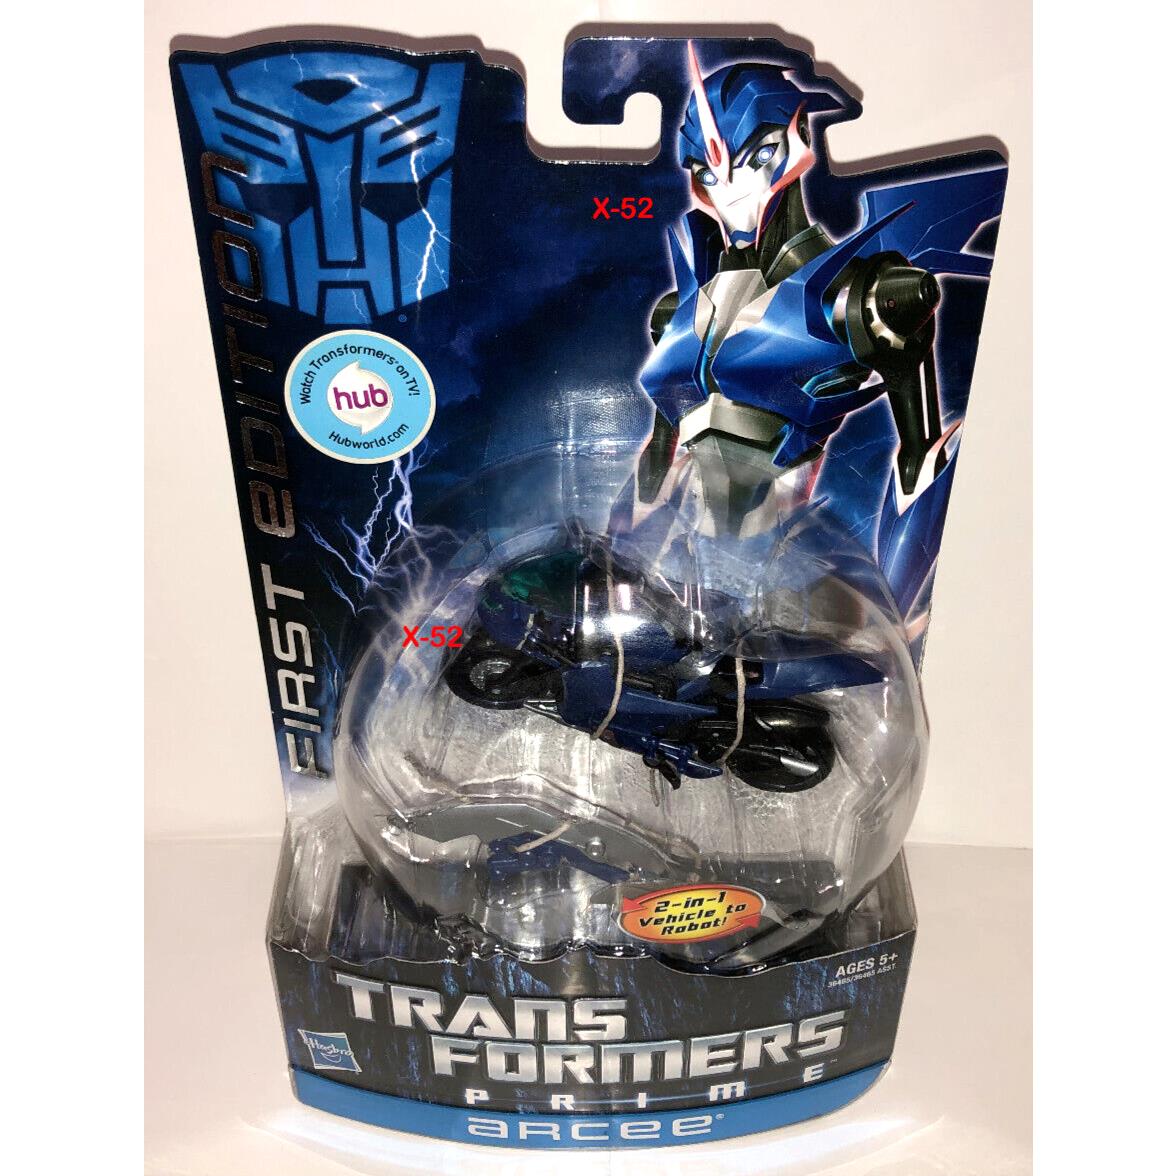 Transformers Prime Arcee First Edition Figure Blue Motorcycle Female Autobot Toy